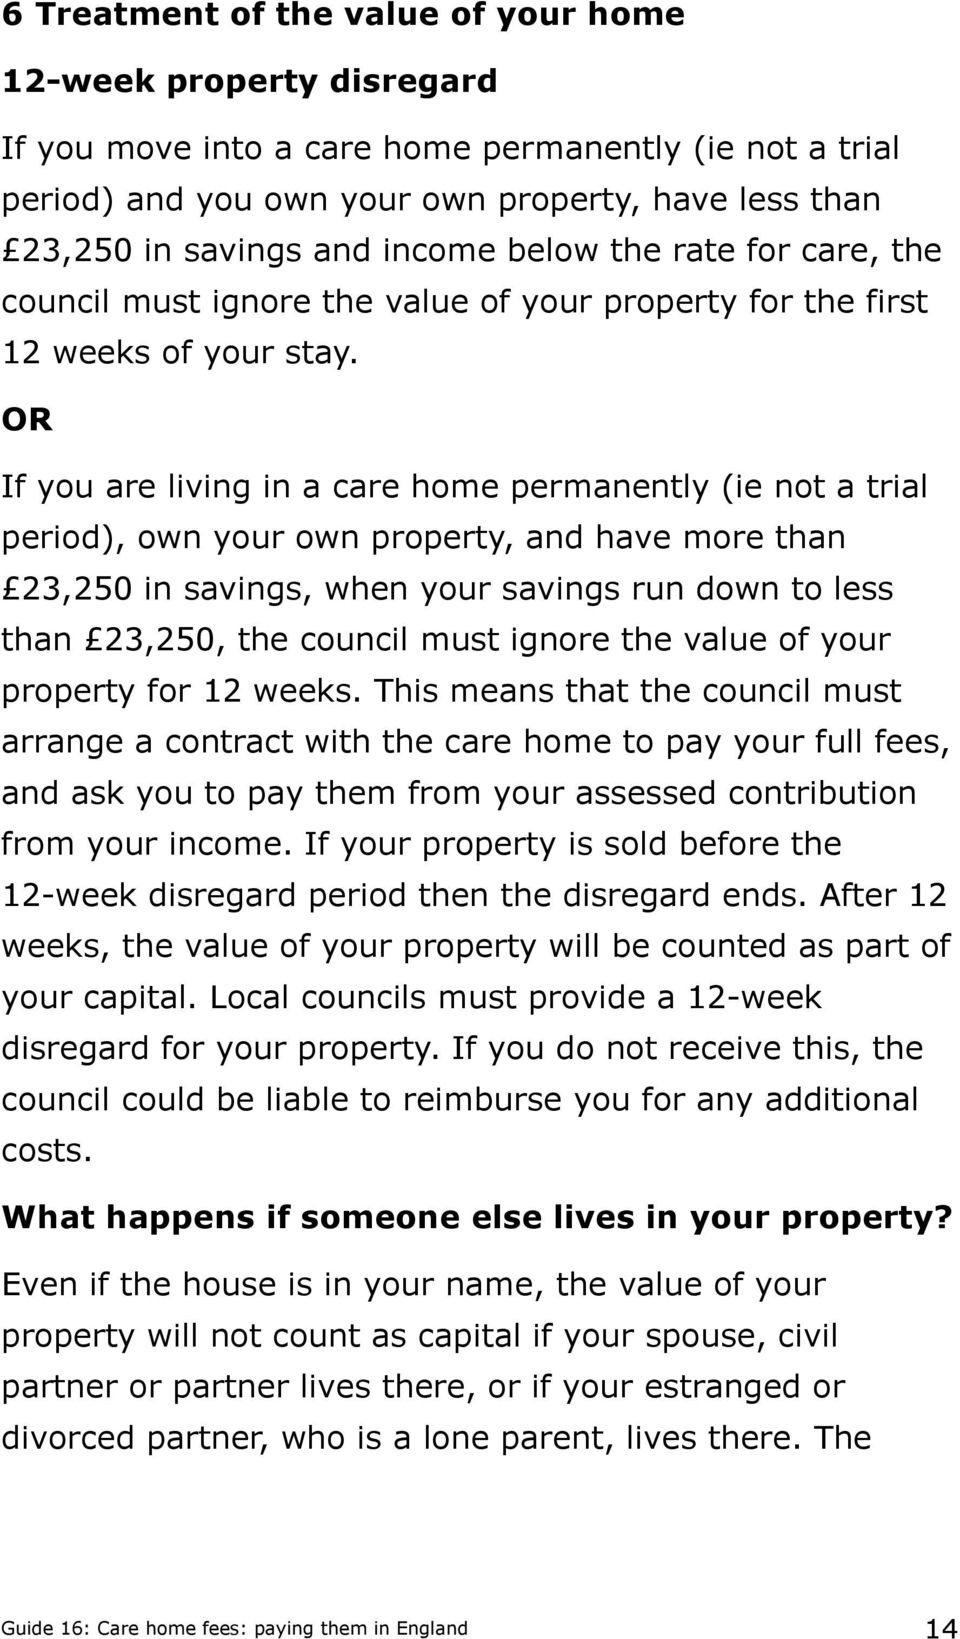 OR If you are living in a care home permanently (ie not a trial period), own your own property, and have more than 23,250 in savings, when your savings run down to less than 23,250, the council must